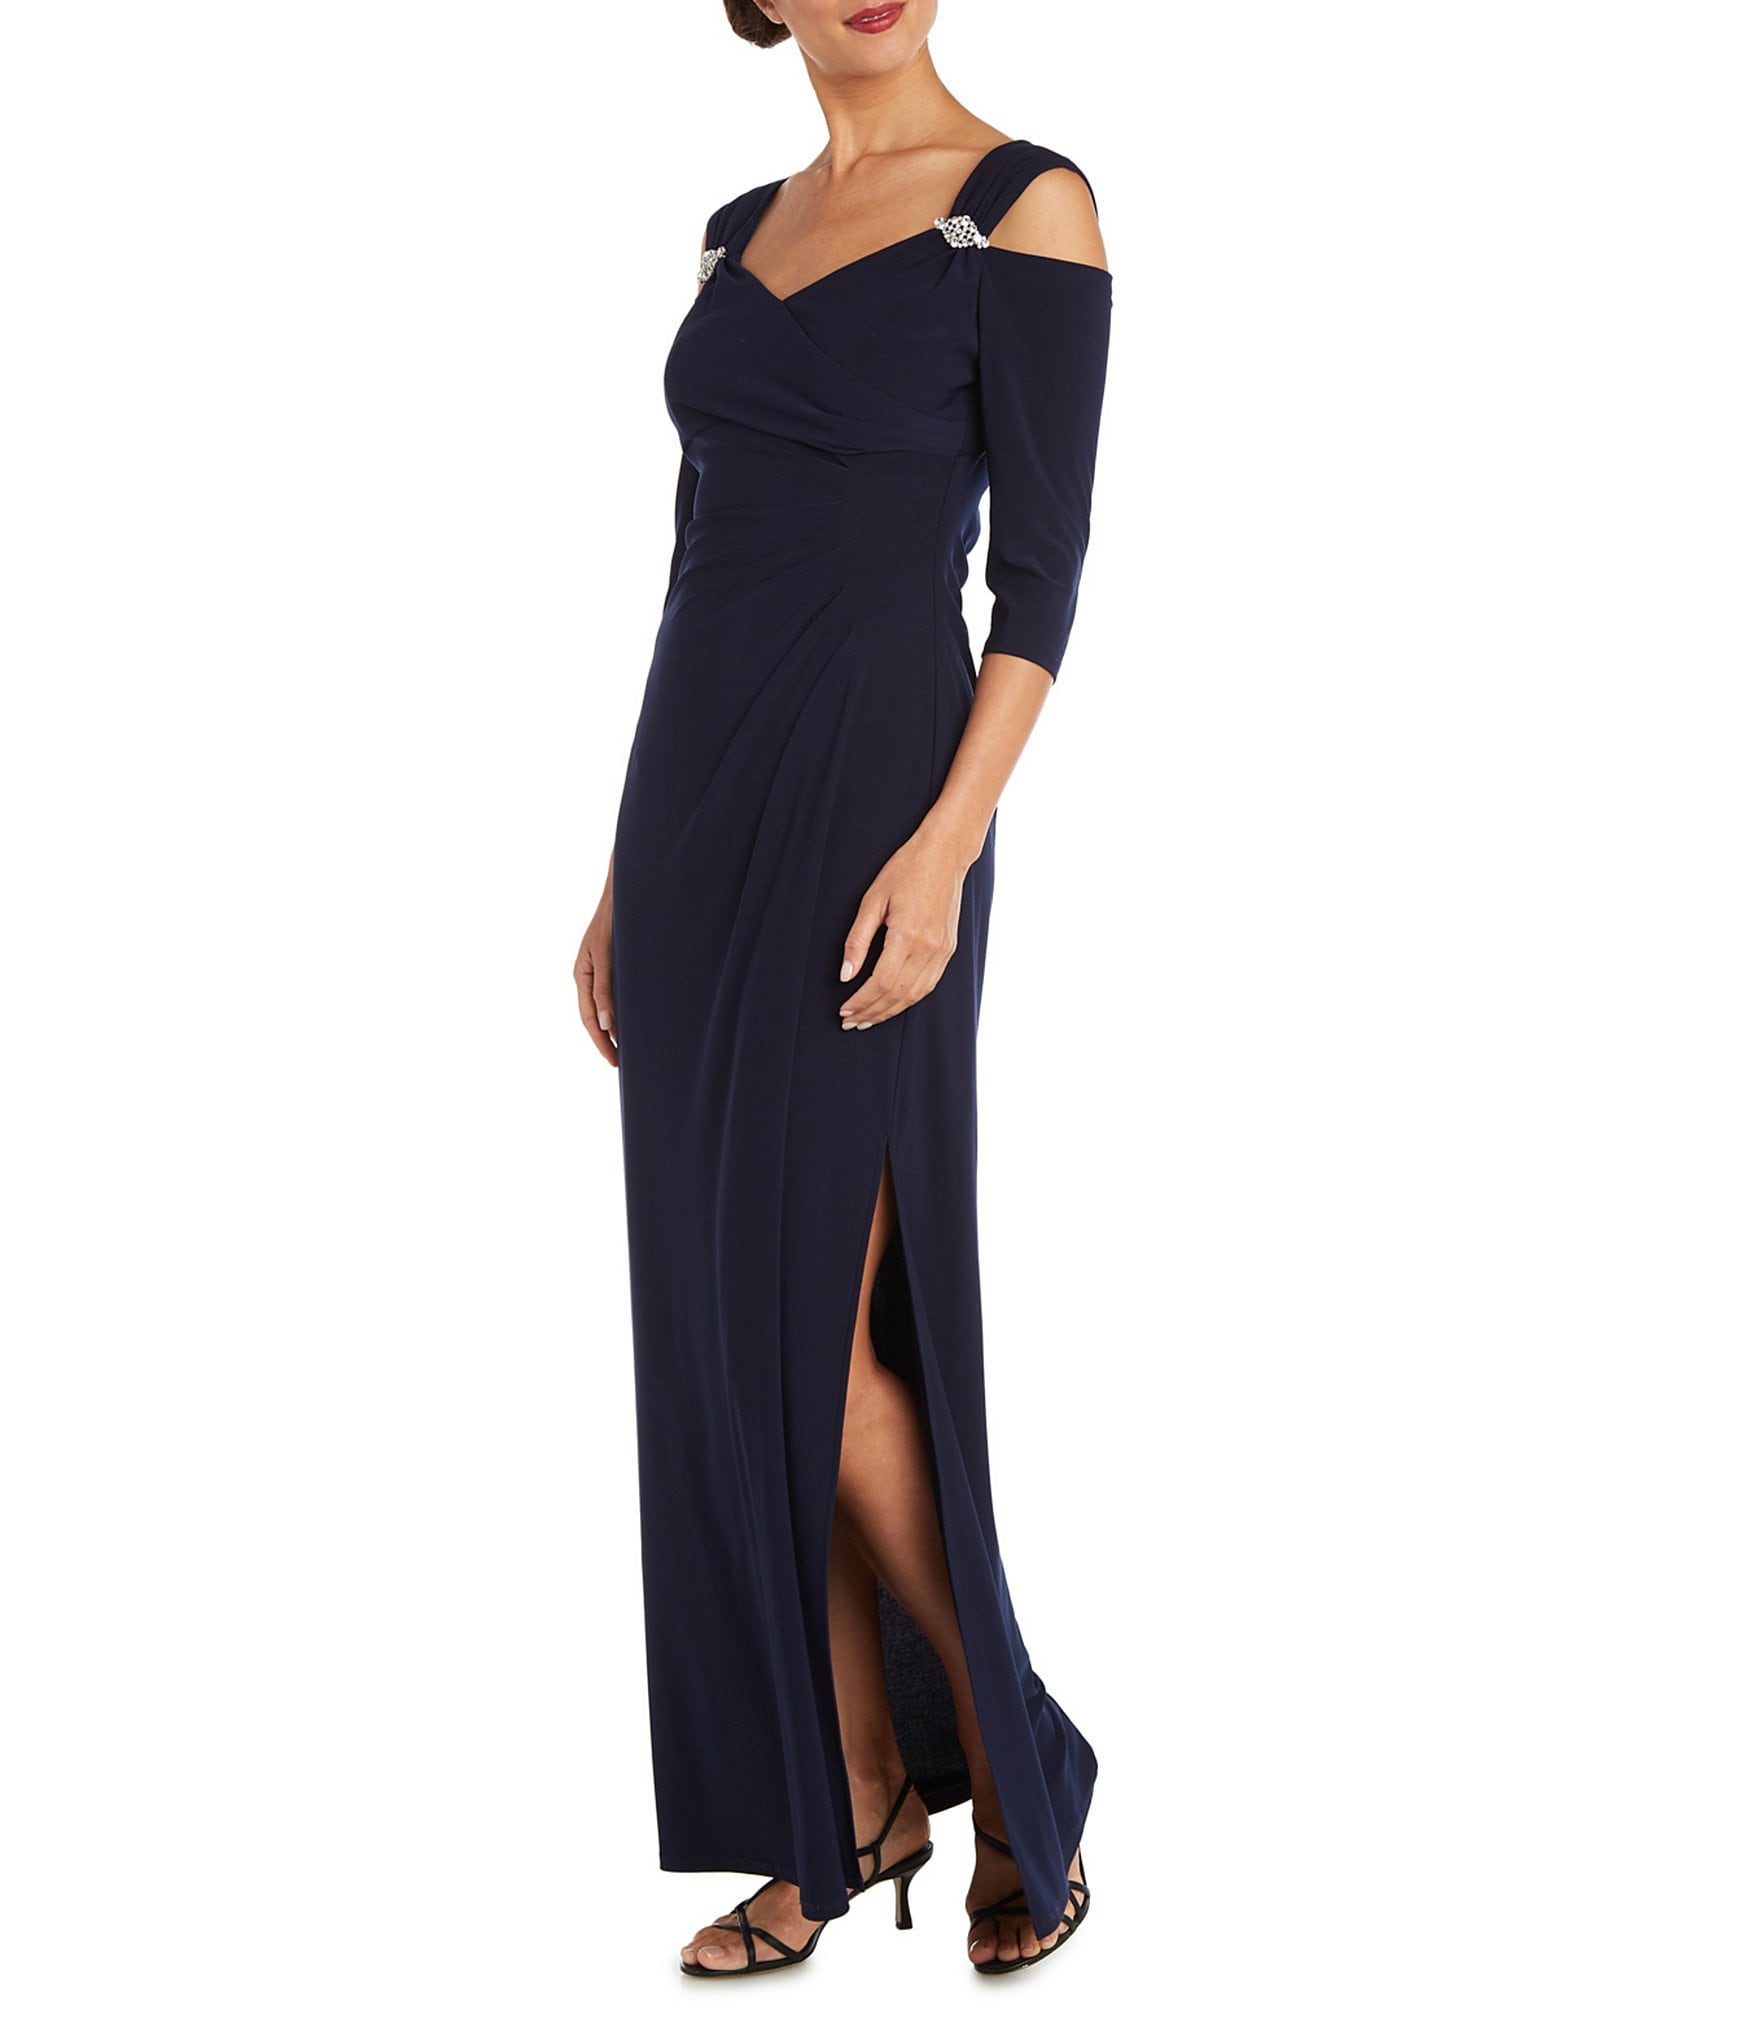 Grrly Grrls - 😍 Charm Strapped Reverse Sweetheart Neckline Sheath Dress 😍  by Grrly Grrls starting at $42.33 Description: Contemporary chic and almost  architecturally unique, this tight sheath dress features a curve-skimming